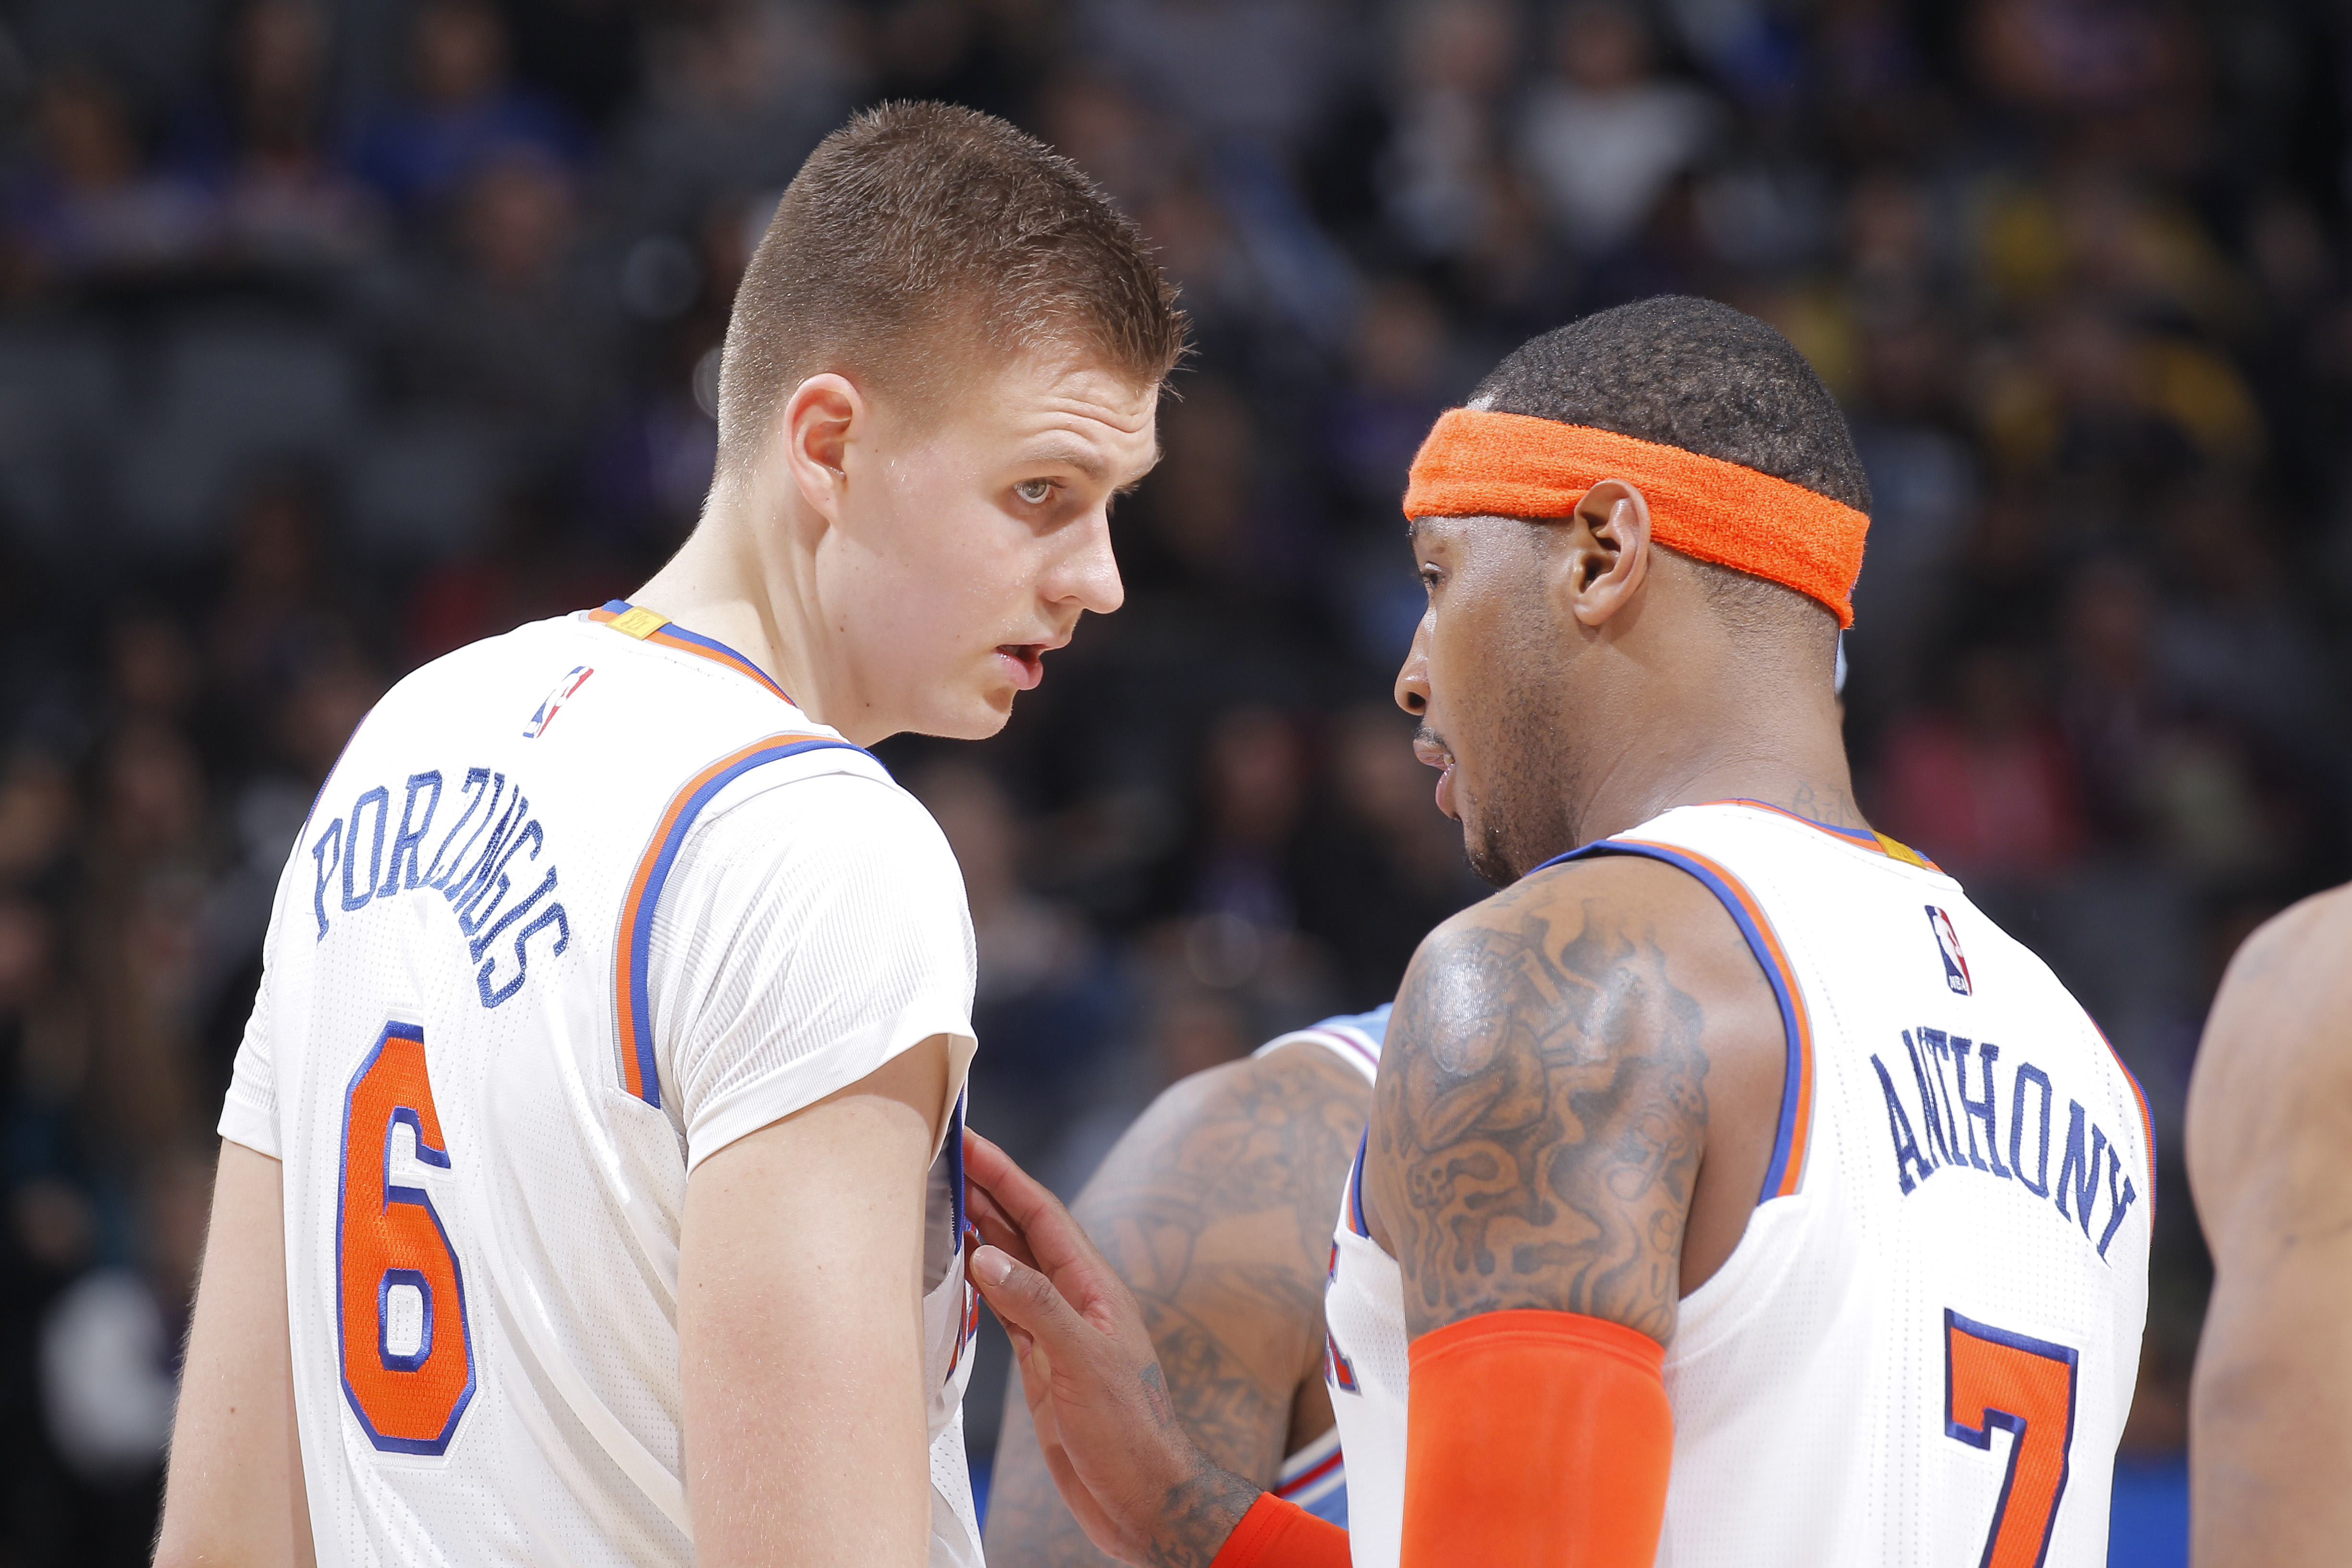 SACRAMENTO, CA - DECEMBER 9: Kristaps Porzingis #6 and Carmelo Anthony #7 of the New York Knicks talk during the game against the Sacramento Kings on December 9, 2016 at Golden 1 Center in Sacramento, California. NOTE TO USER: User expressly acknowledges and agrees that, by downloading and or using this photograph, User is consenting to the terms and conditions of the Getty Images Agreement. Mandatory Copyright Notice: Copyright 2016 NBAE (Photo by Rocky Widner/NBAE via Getty Images)